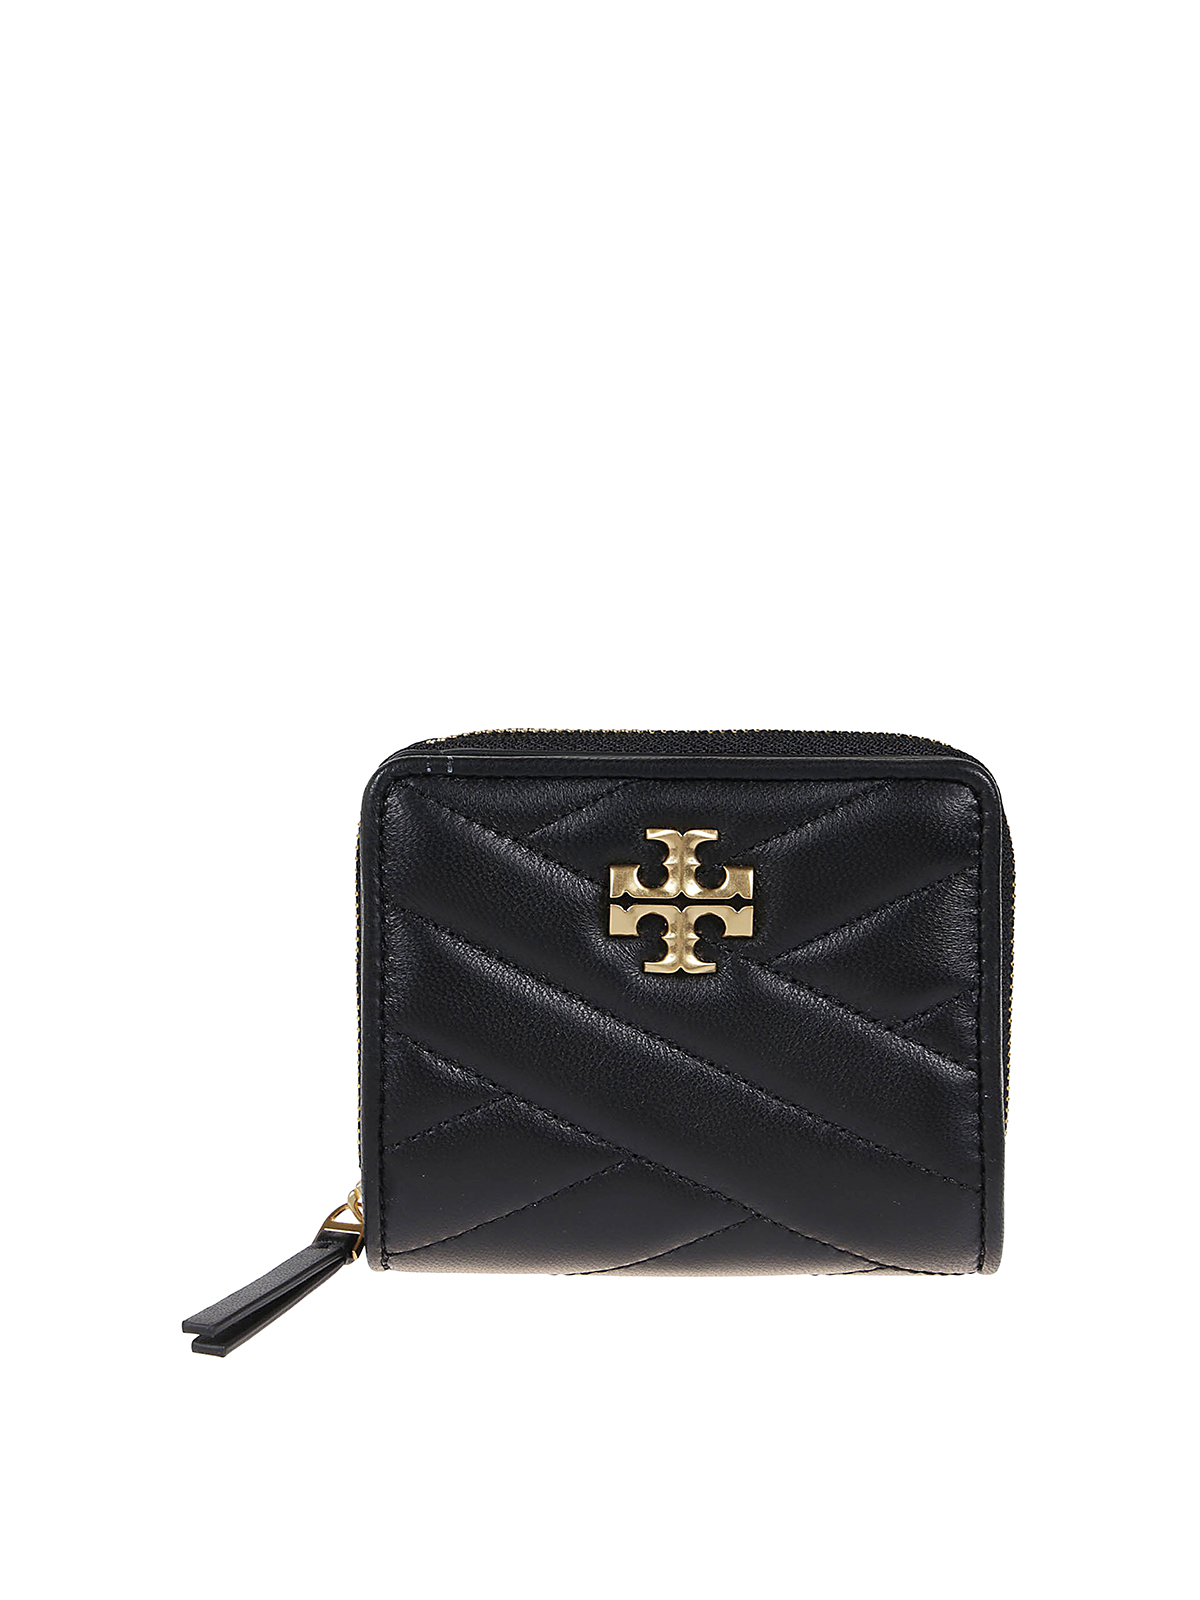 Shop This Bestselling Tory Burch Wallet on a Chain | Us Weekly